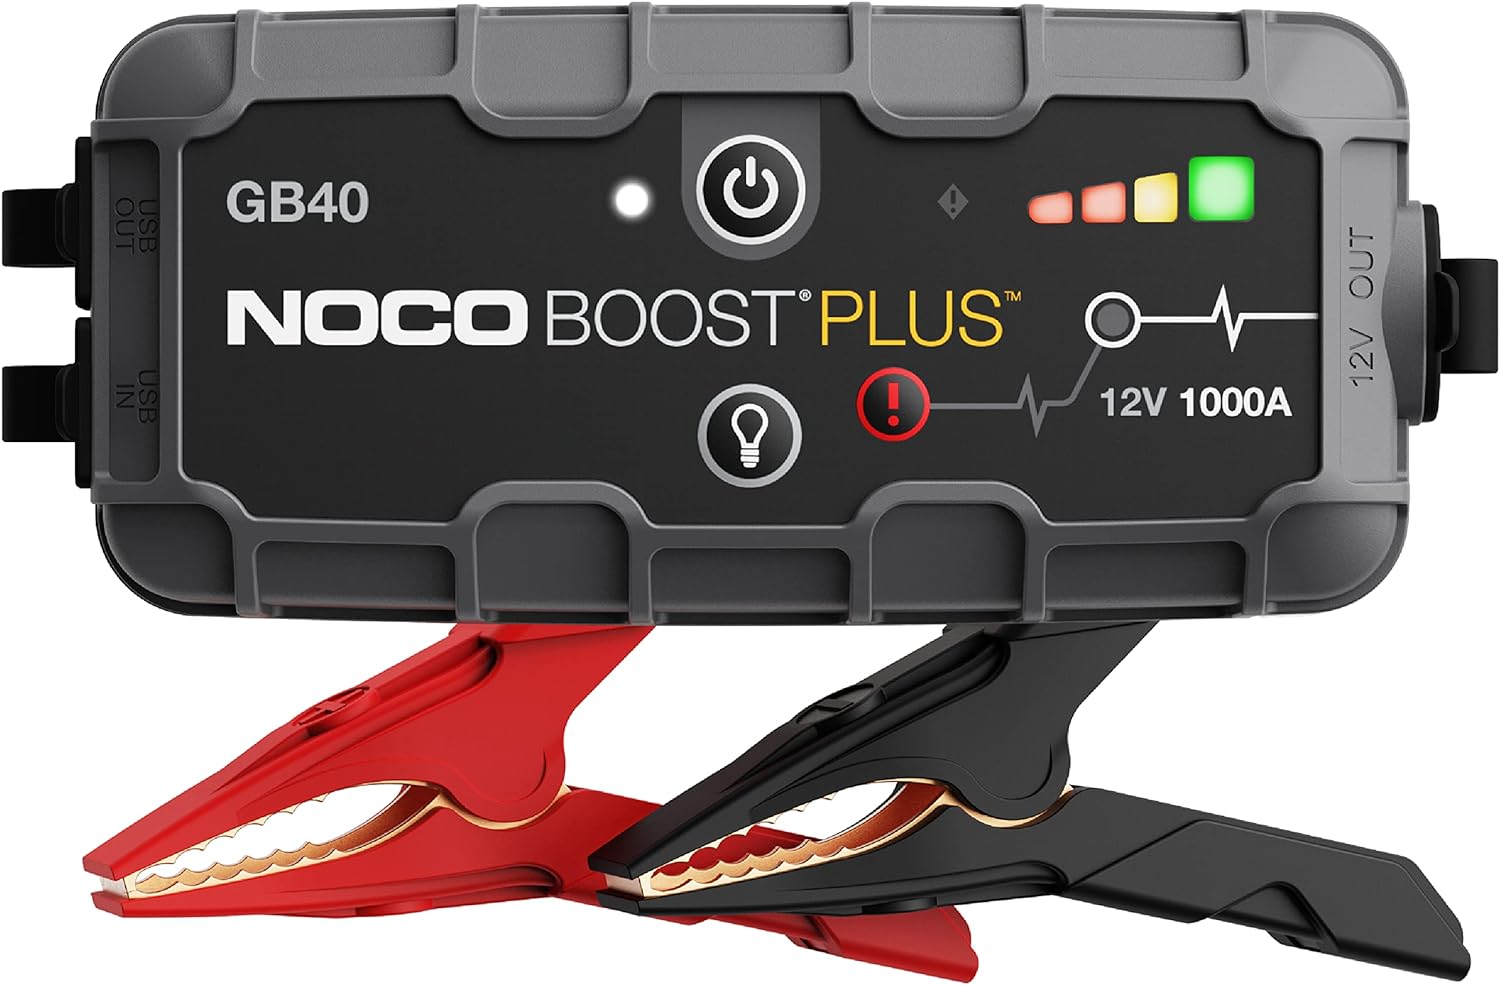 NOCO Boost Plus GB40 1000 Amp 12-Volt UltraSafe Portable Lithium Car Battery Jump Starter Pack for up To 6-Liter Petrol and 3-Liter Diesel Engines 5022